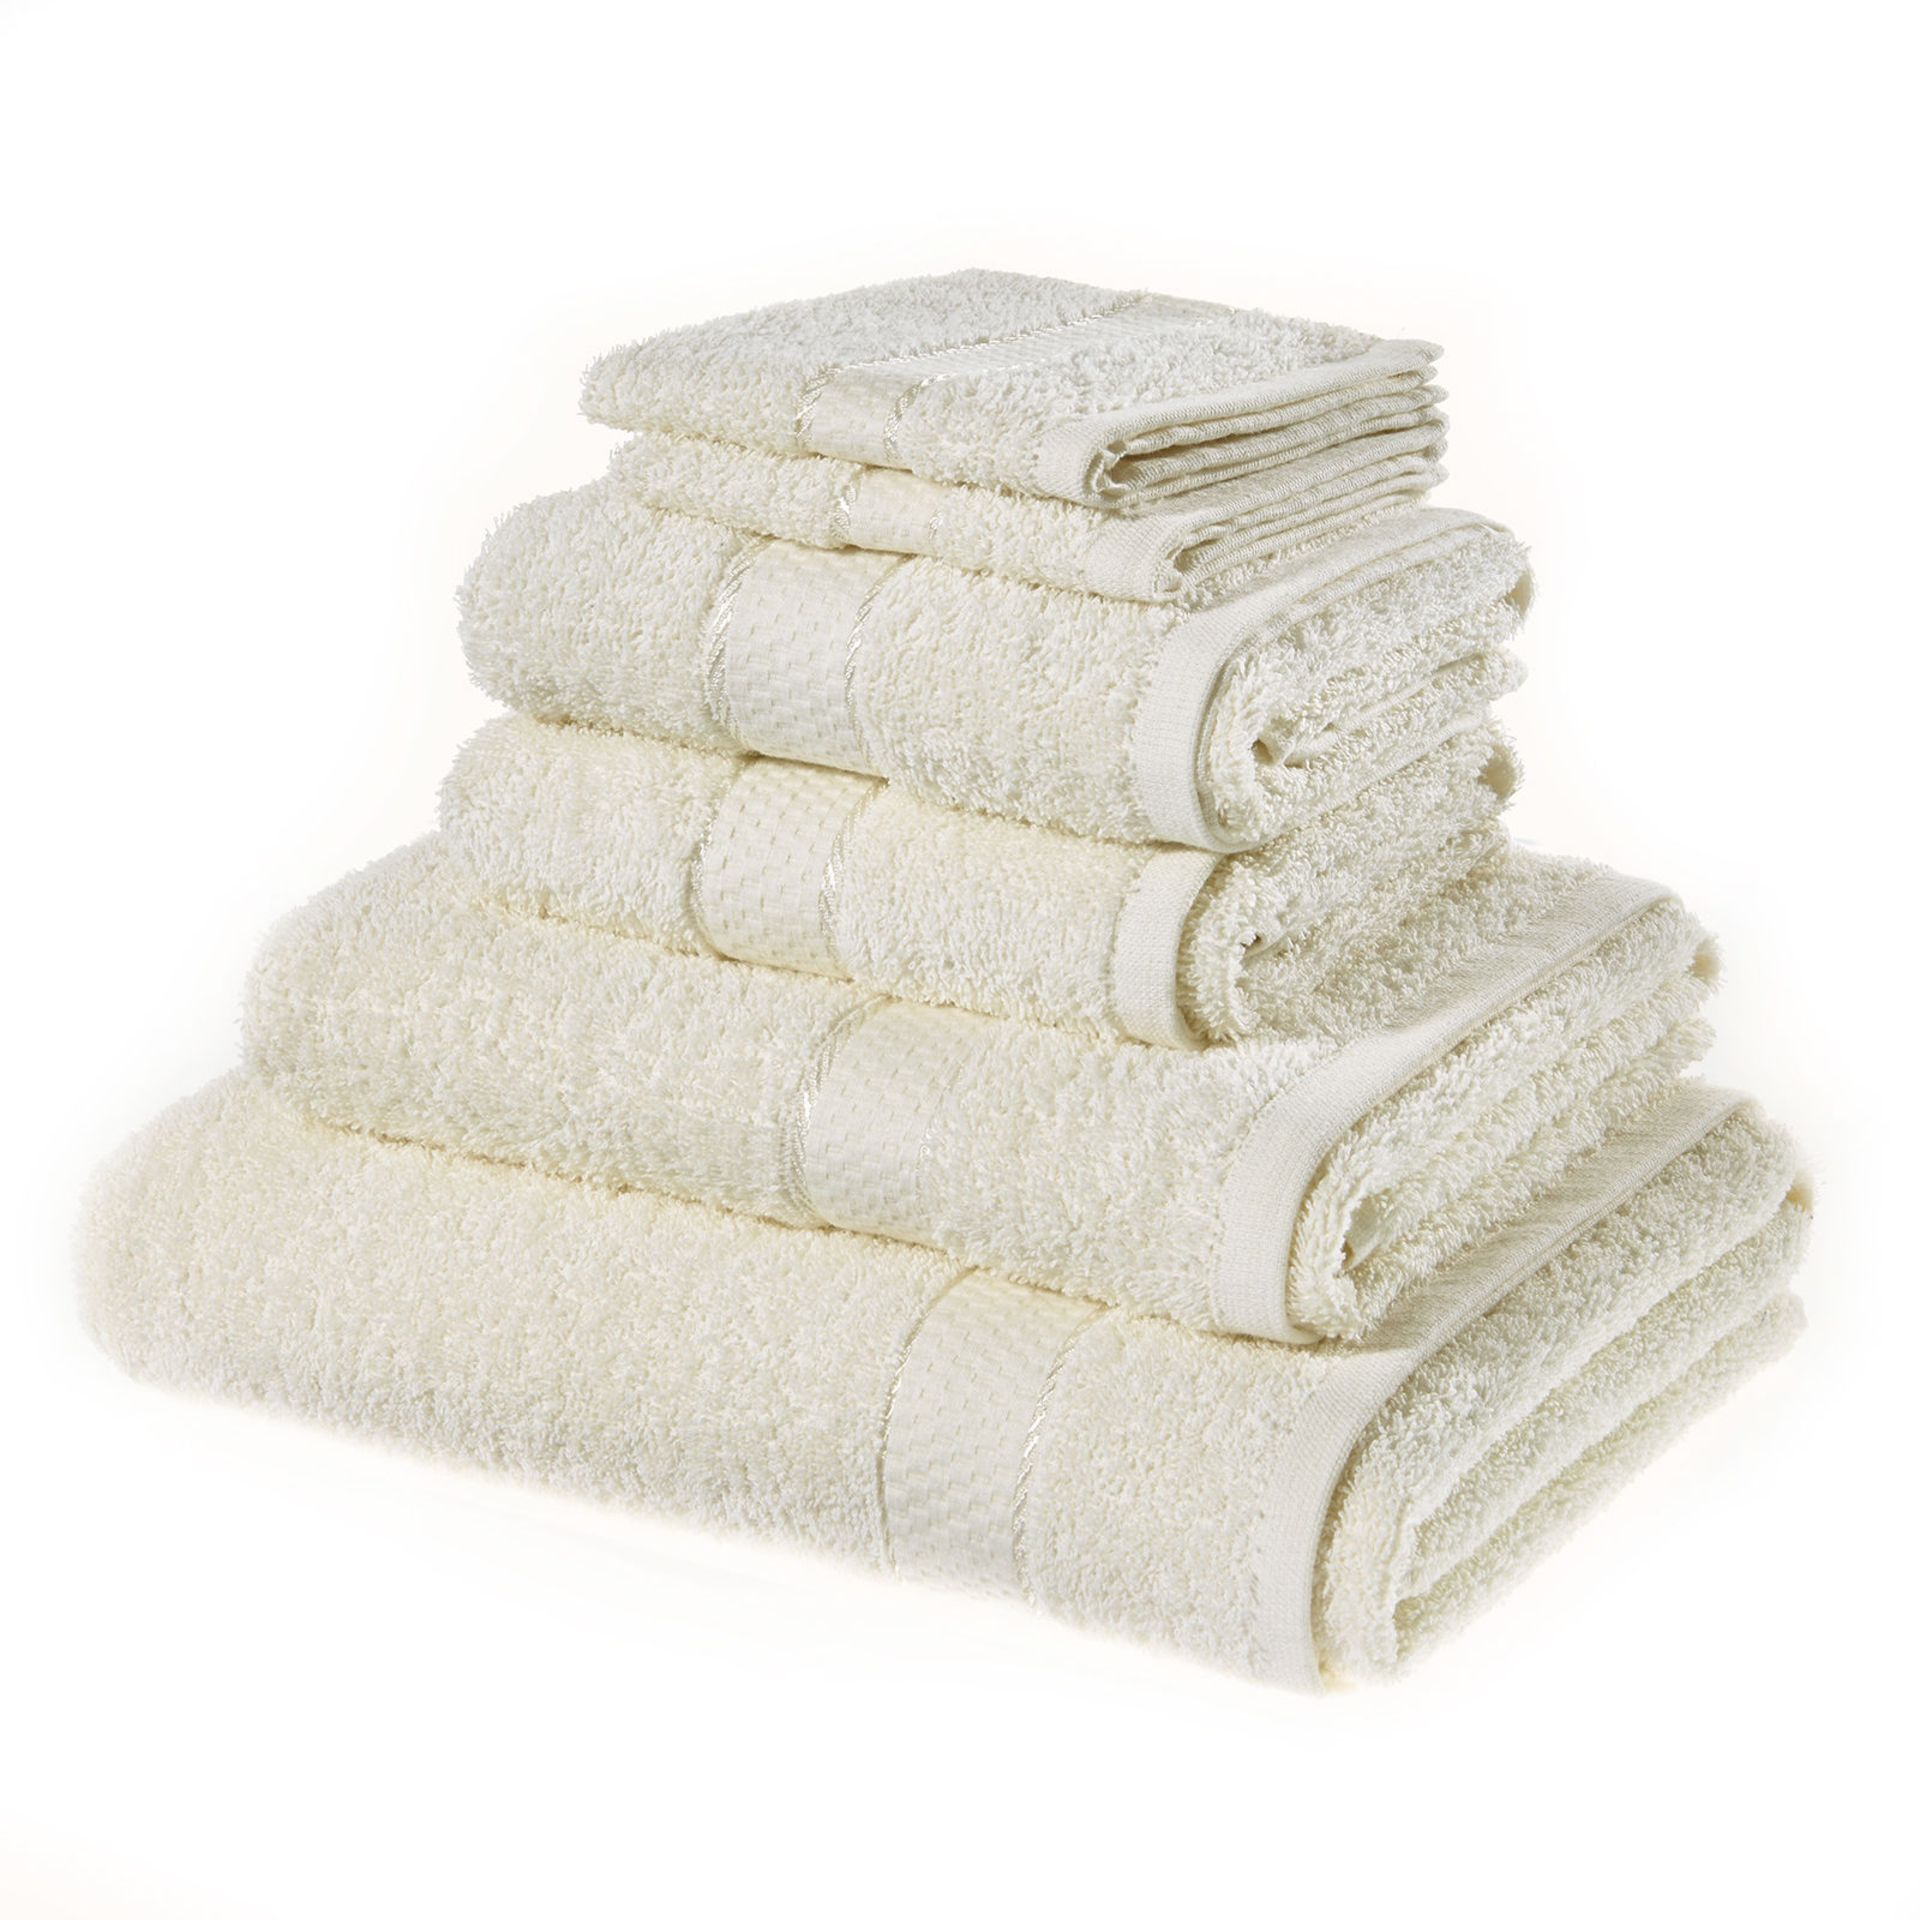 V Brand New Cream 6 Piece Towel Bale Set With 2 Face Towels - 2 Hand Towels - 1 Bath Sheet - 1